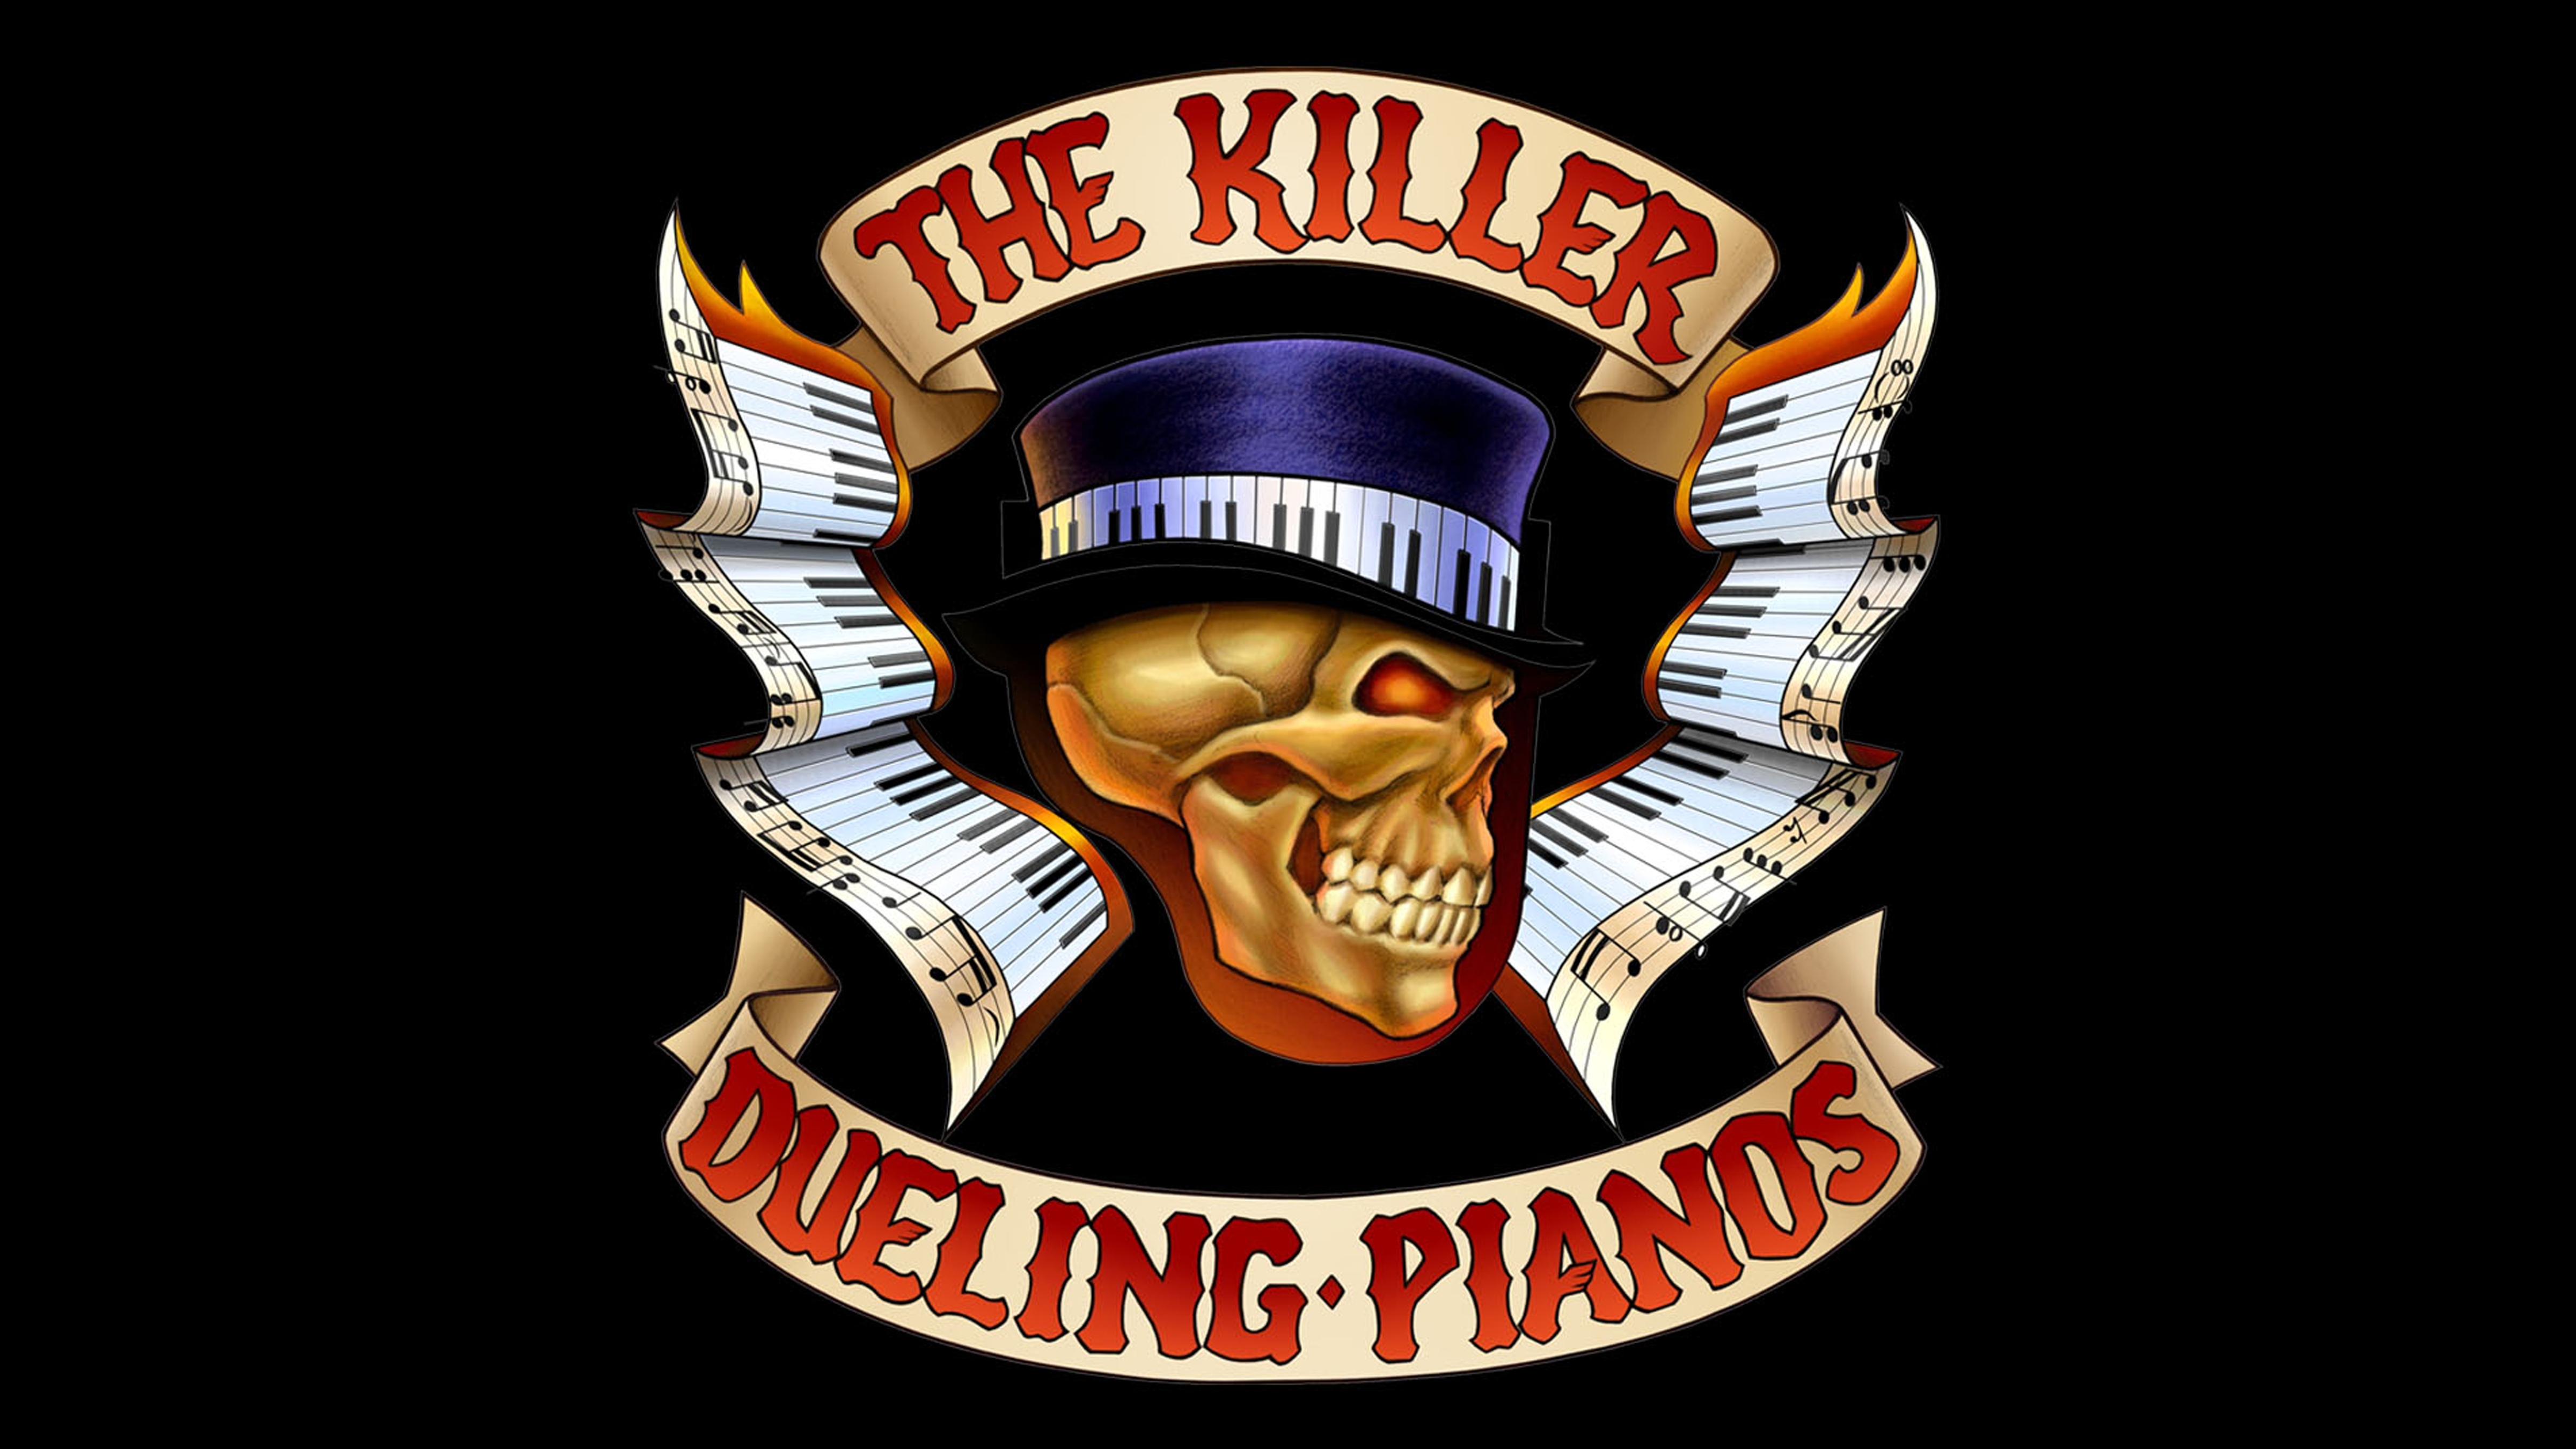 The Killer Dueling Pianos at Mount Palomar Winery.